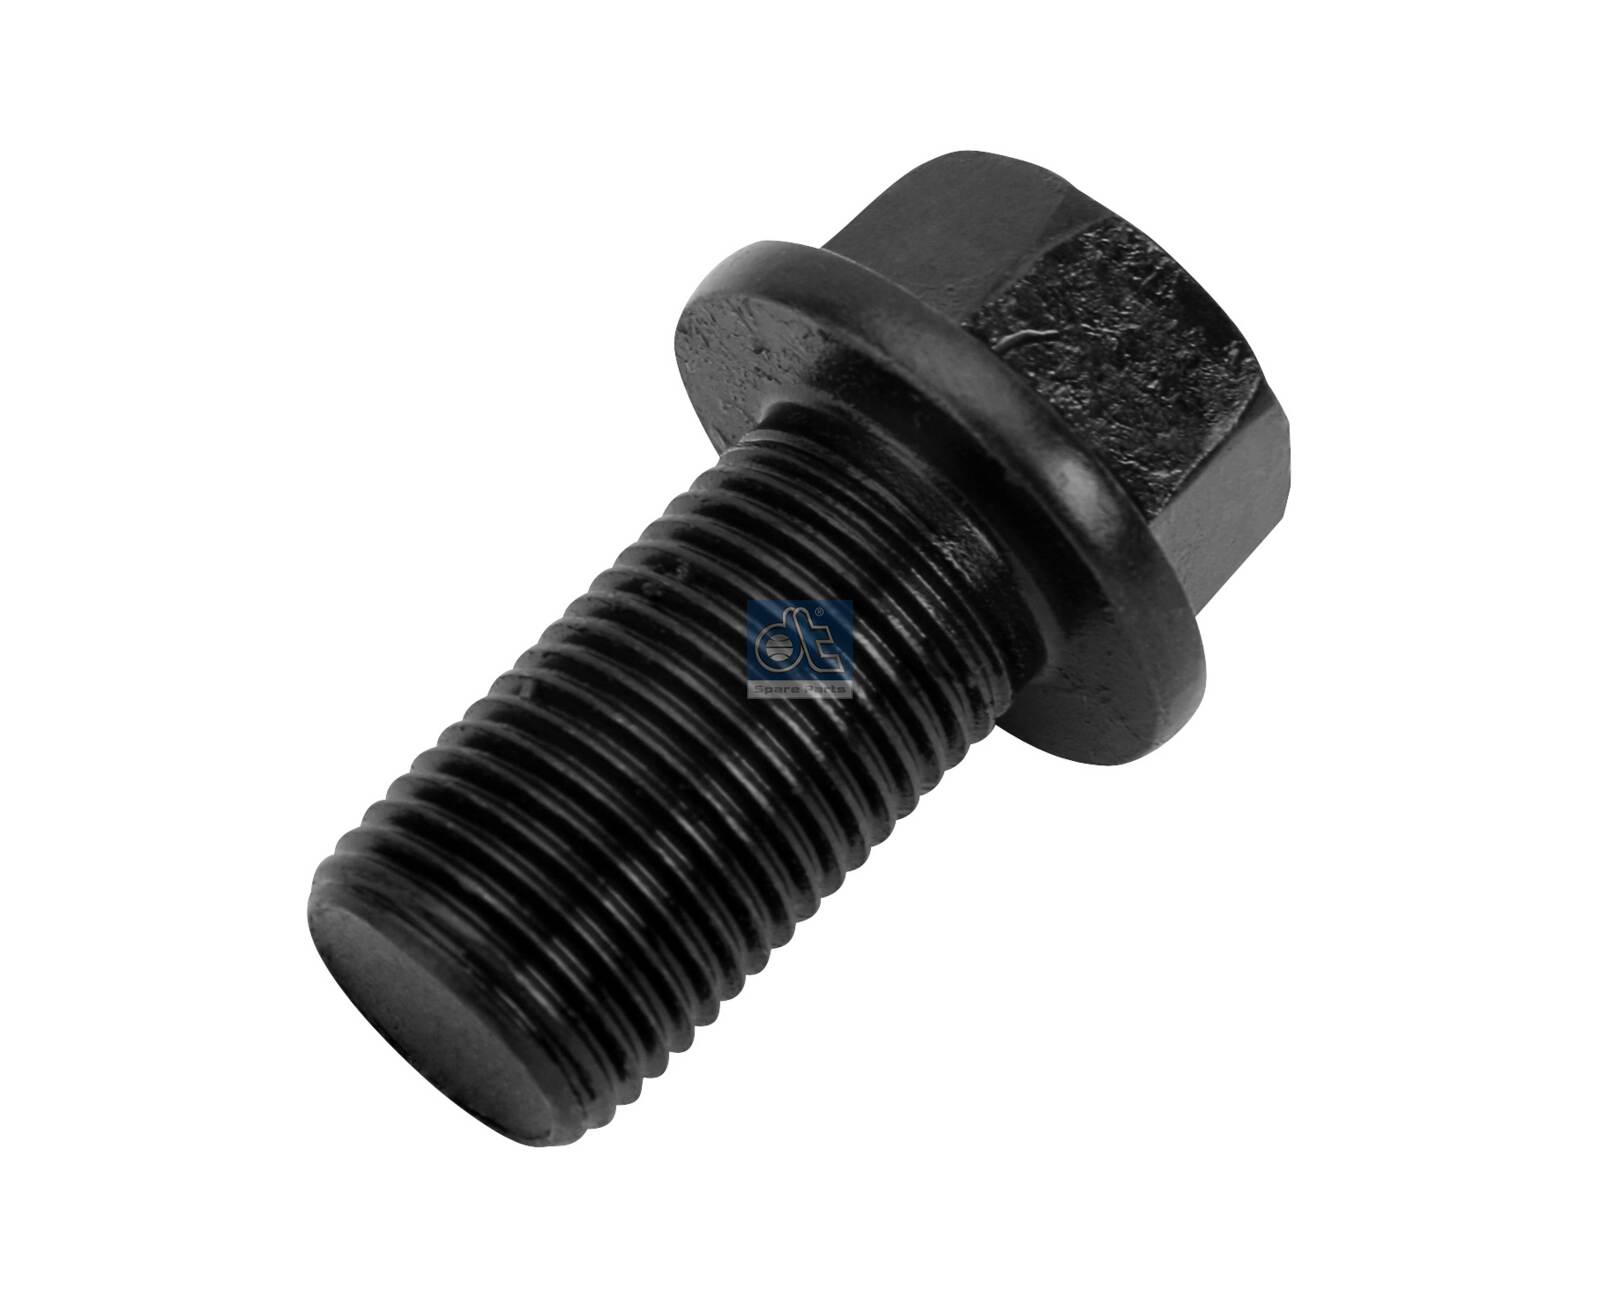 4.40096, Screw, DT Spare Parts, 4039900204, 51.90020.0135, 4220350071, 51.90020.0136, 4220350204, A4039900204, A4220350071, A4220350204, 20010342230, 814.628, 20.0103.42230, 51900200135, 51900200136